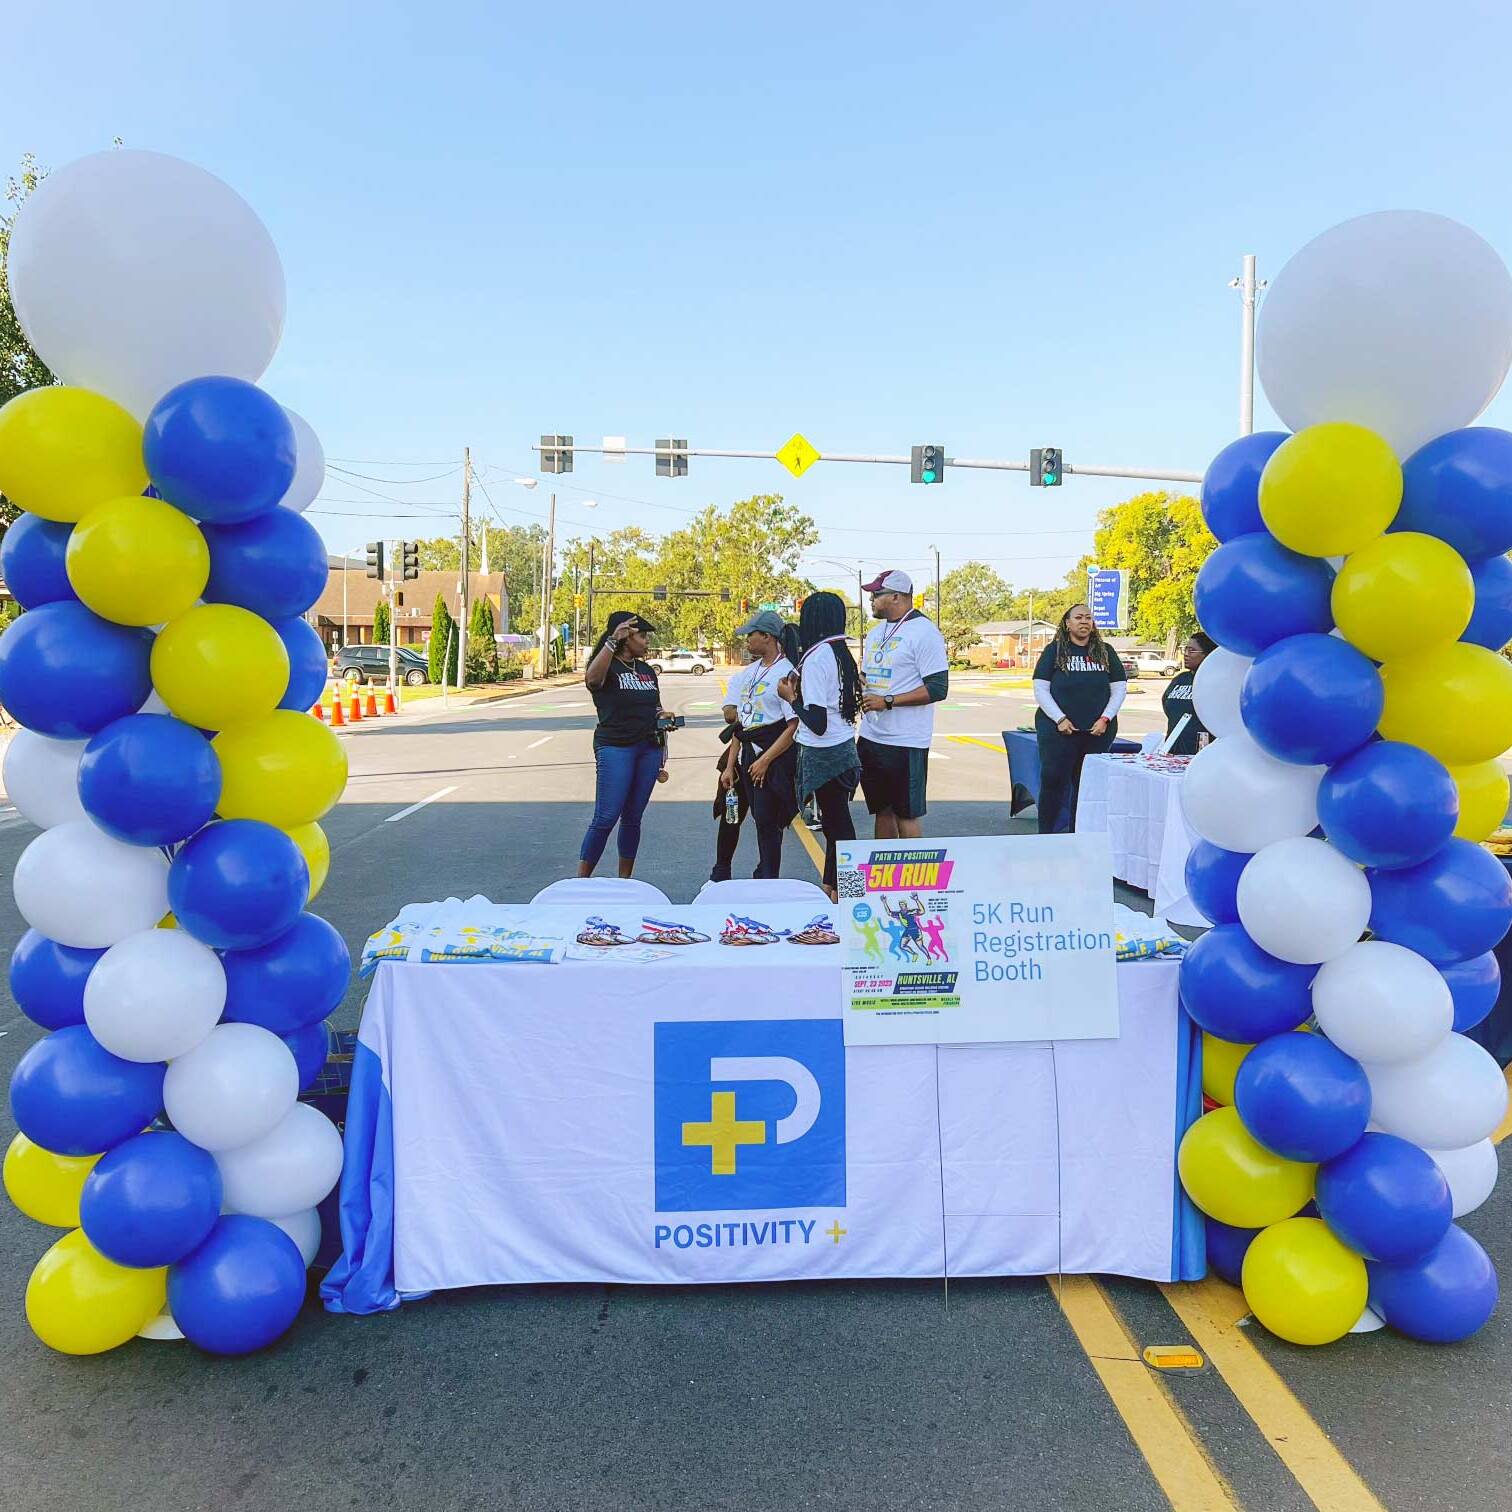 People Path to Positivity 5K Run Check In Tables